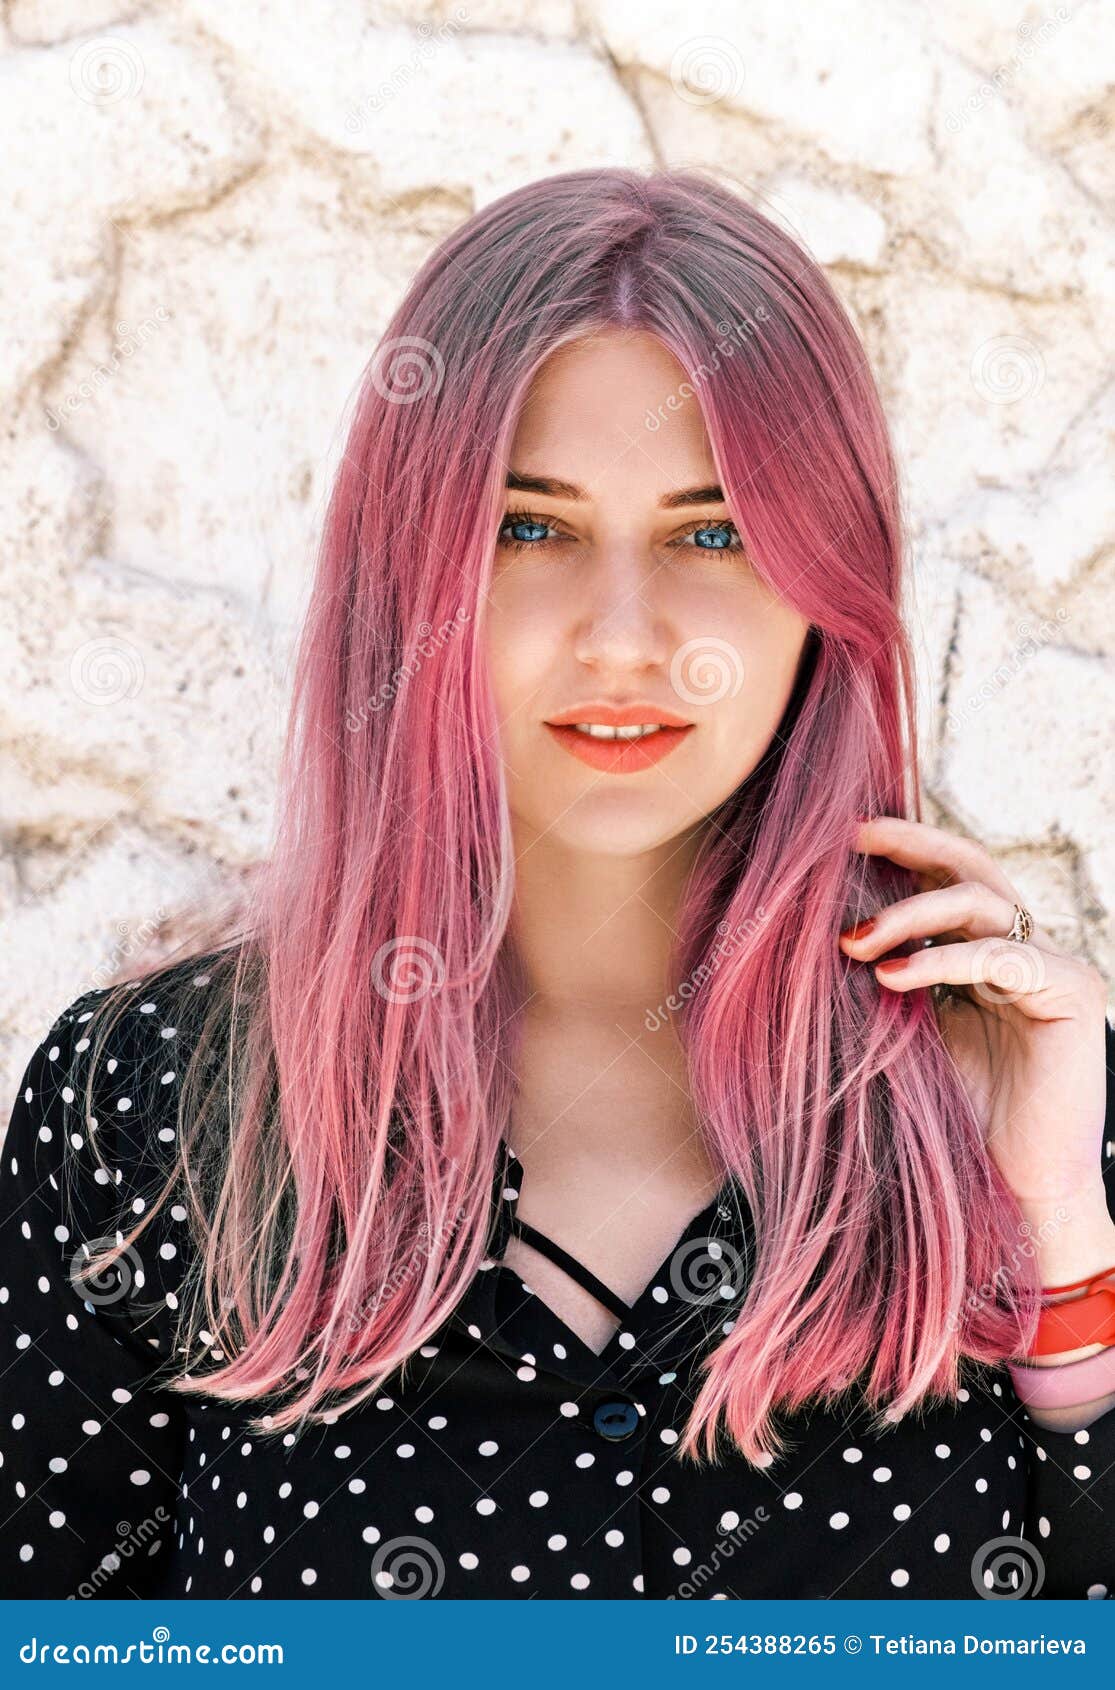 Portrait Of A Beautiful Blue Eyed Woman With Pink Hair Looking Into The Camera Against A Light 